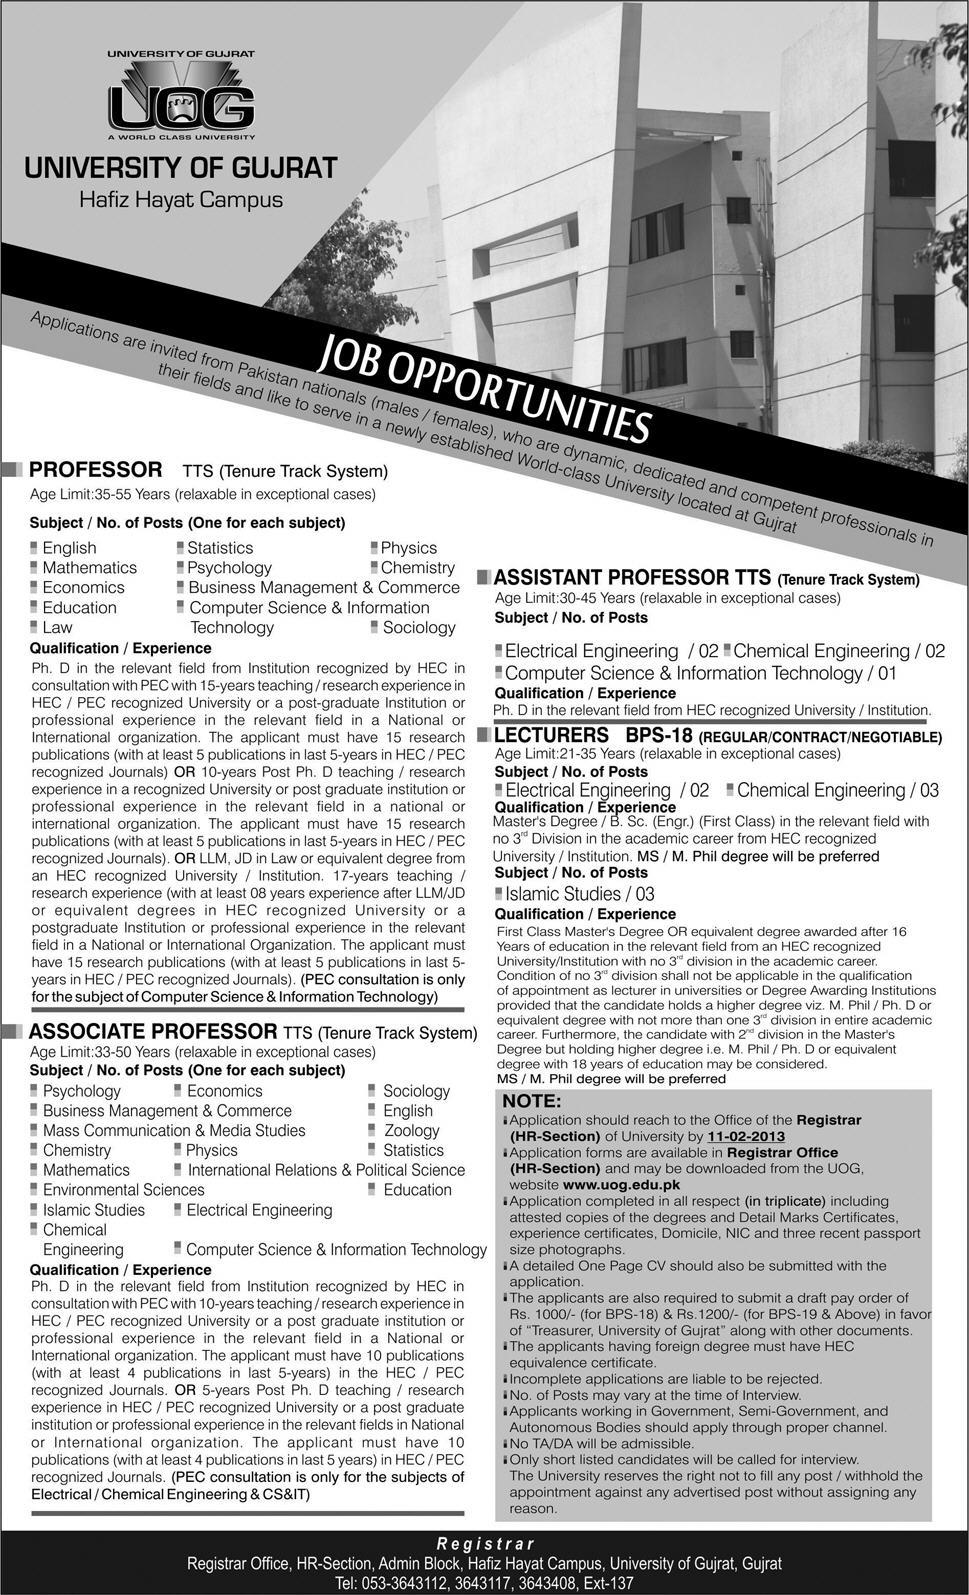 University of Gujrat Jobs 2013 for Faculty